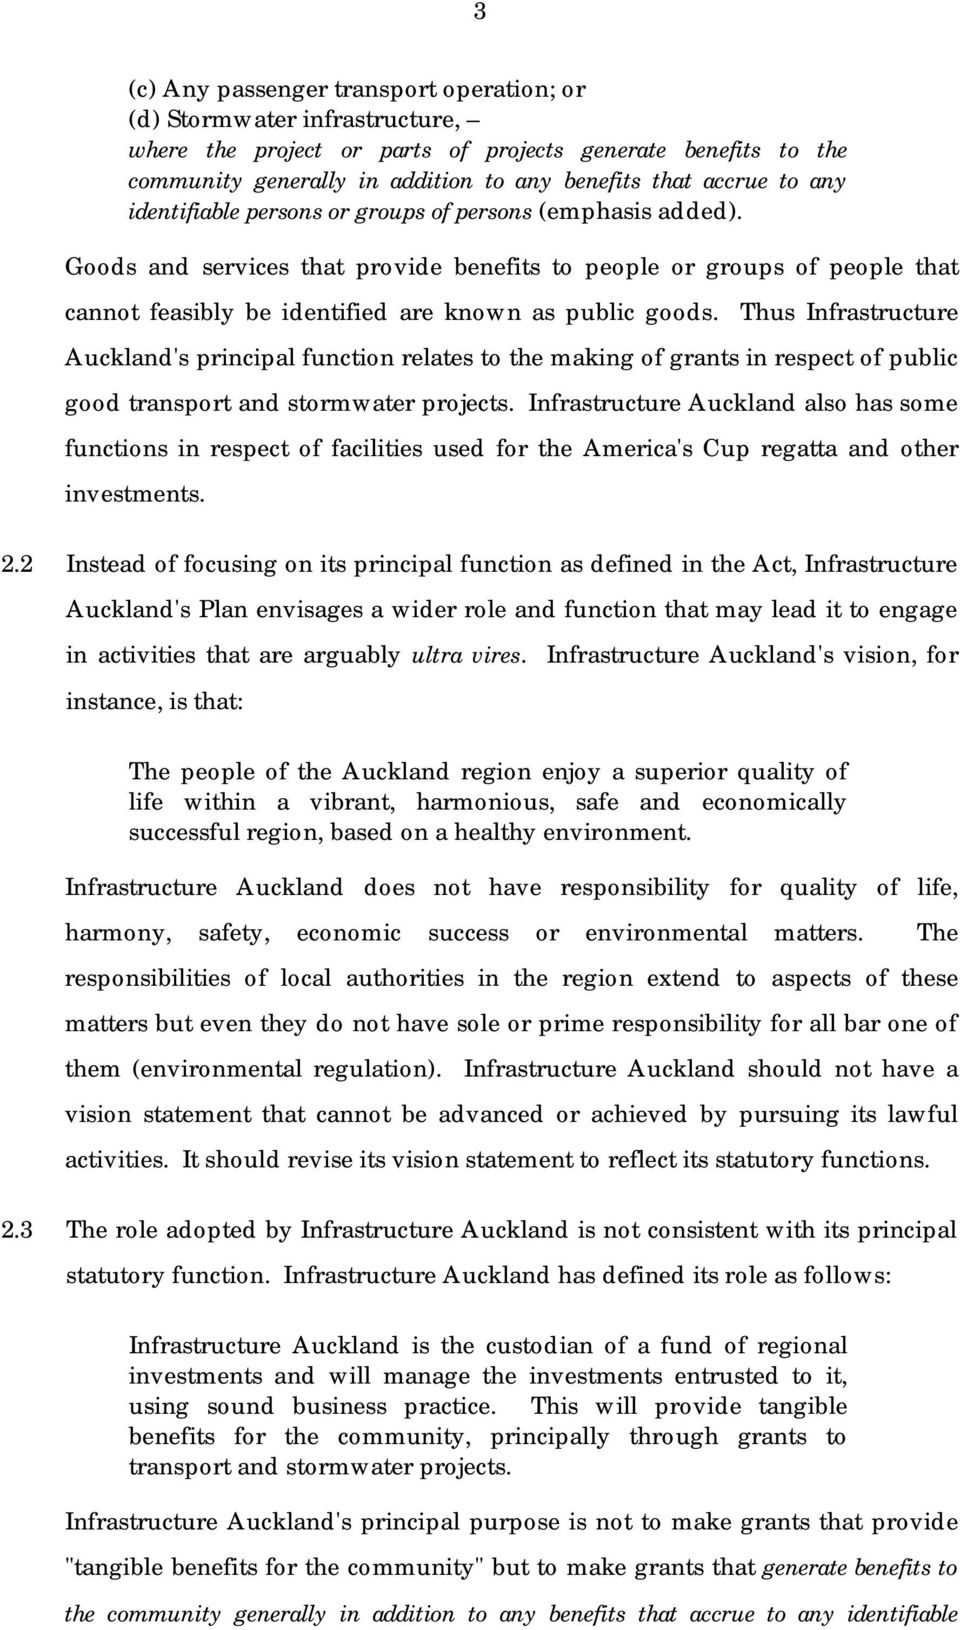 Thus Infrastructure Auckland's principal function relates to the making of grants in respect of public good transport and stormwater projects.